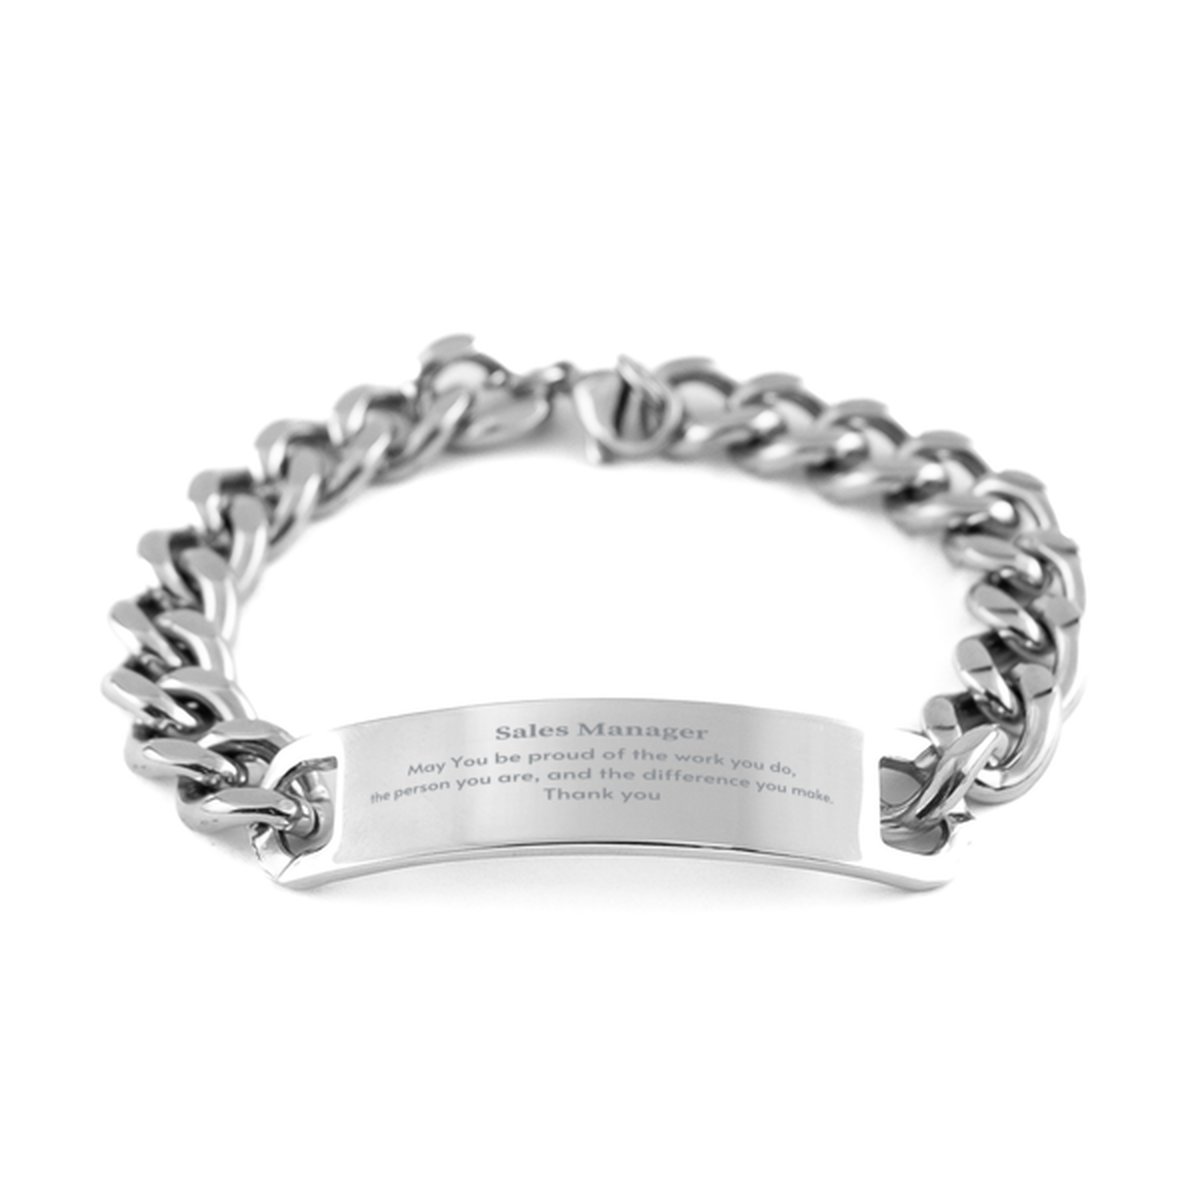 Heartwarming Cuban Chain Stainless Steel Bracelet Retirement Coworkers Gifts for Sales Manager, Sales Manager May You be proud of the work you do, the person you are Gifts for Boss Men Women Friends